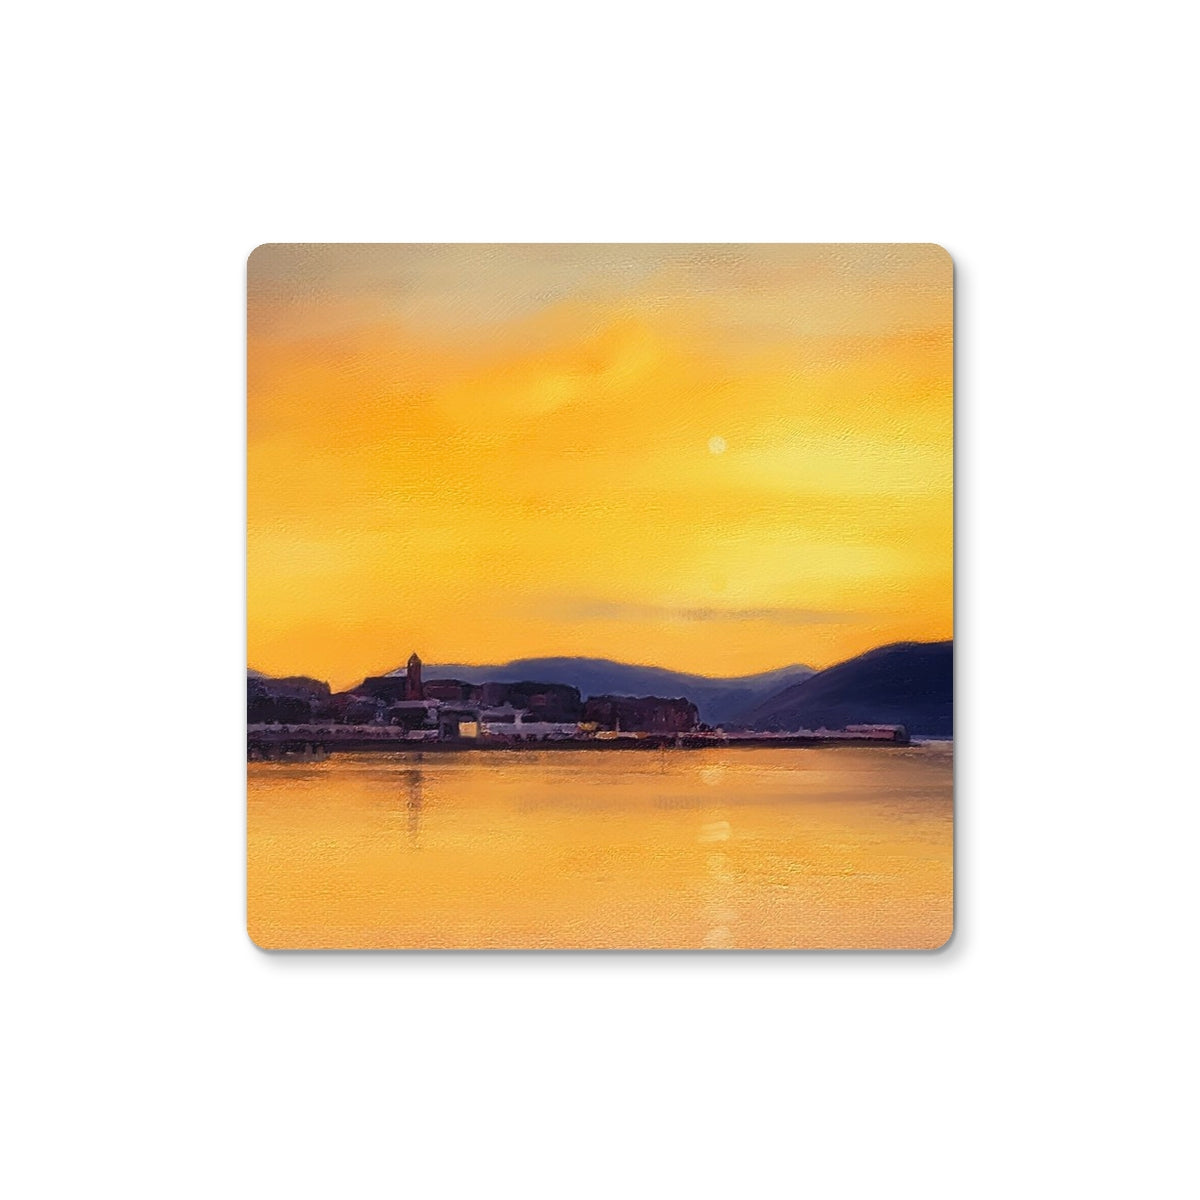 Gourock From Cardwell Bay Art Gifts Coaster-Homeware-River Clyde Art Gallery-Single Coaster-Paintings, Prints, Homeware, Art Gifts From Scotland By Scottish Artist Kevin Hunter